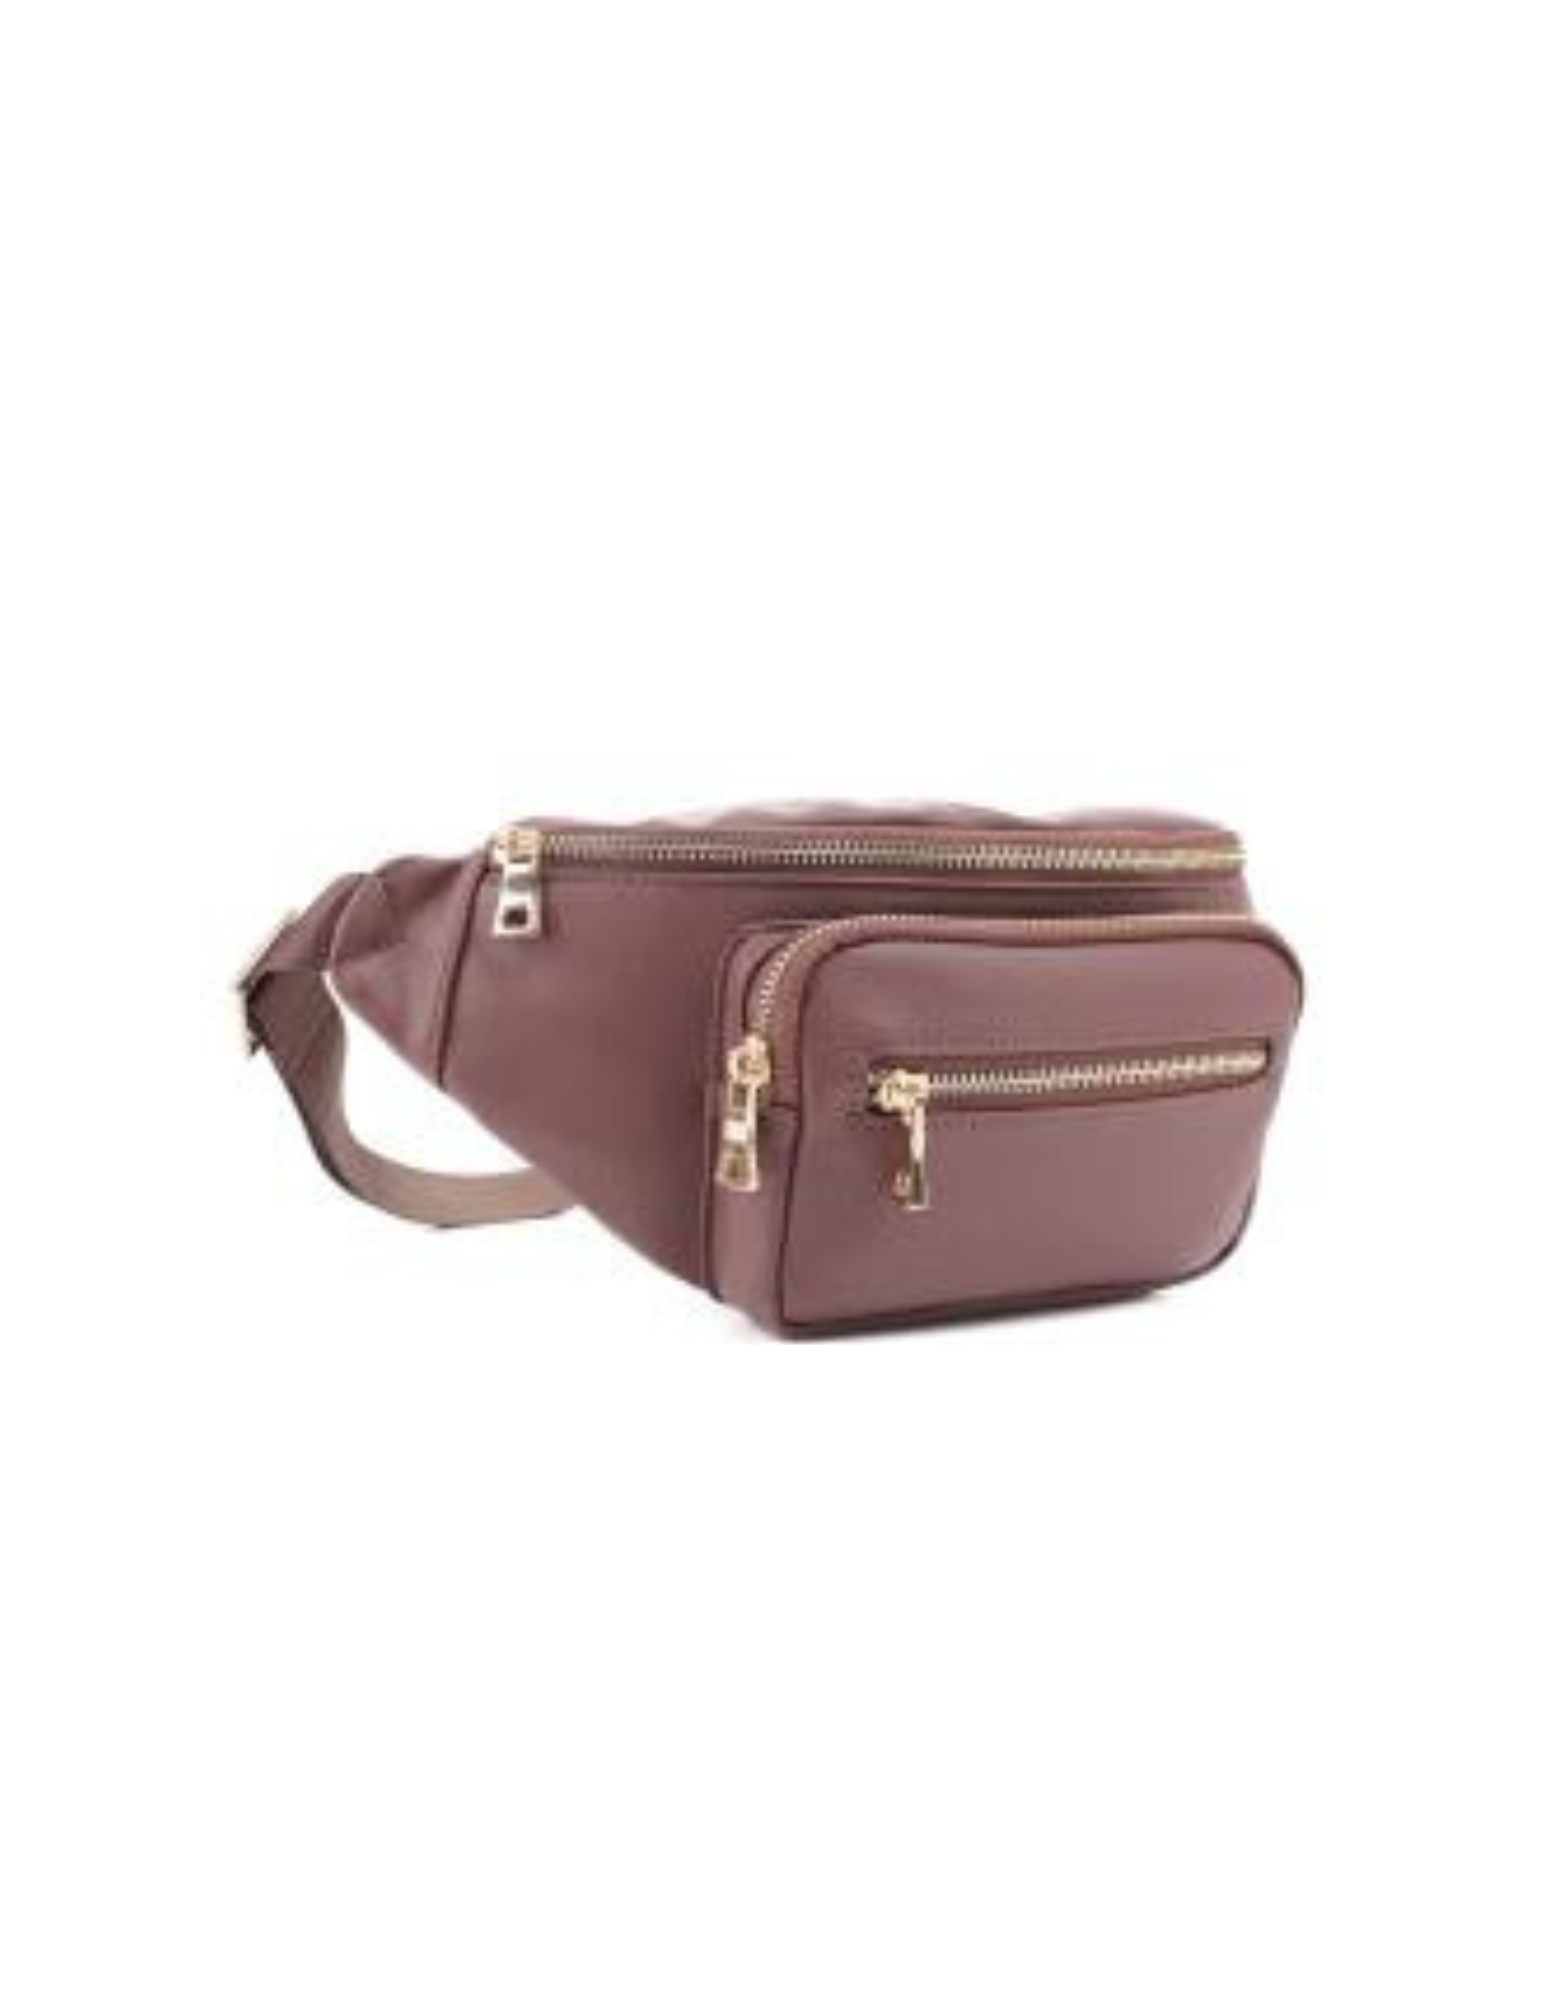 fanny pack sling waist bag accessory trends online boutique casual style